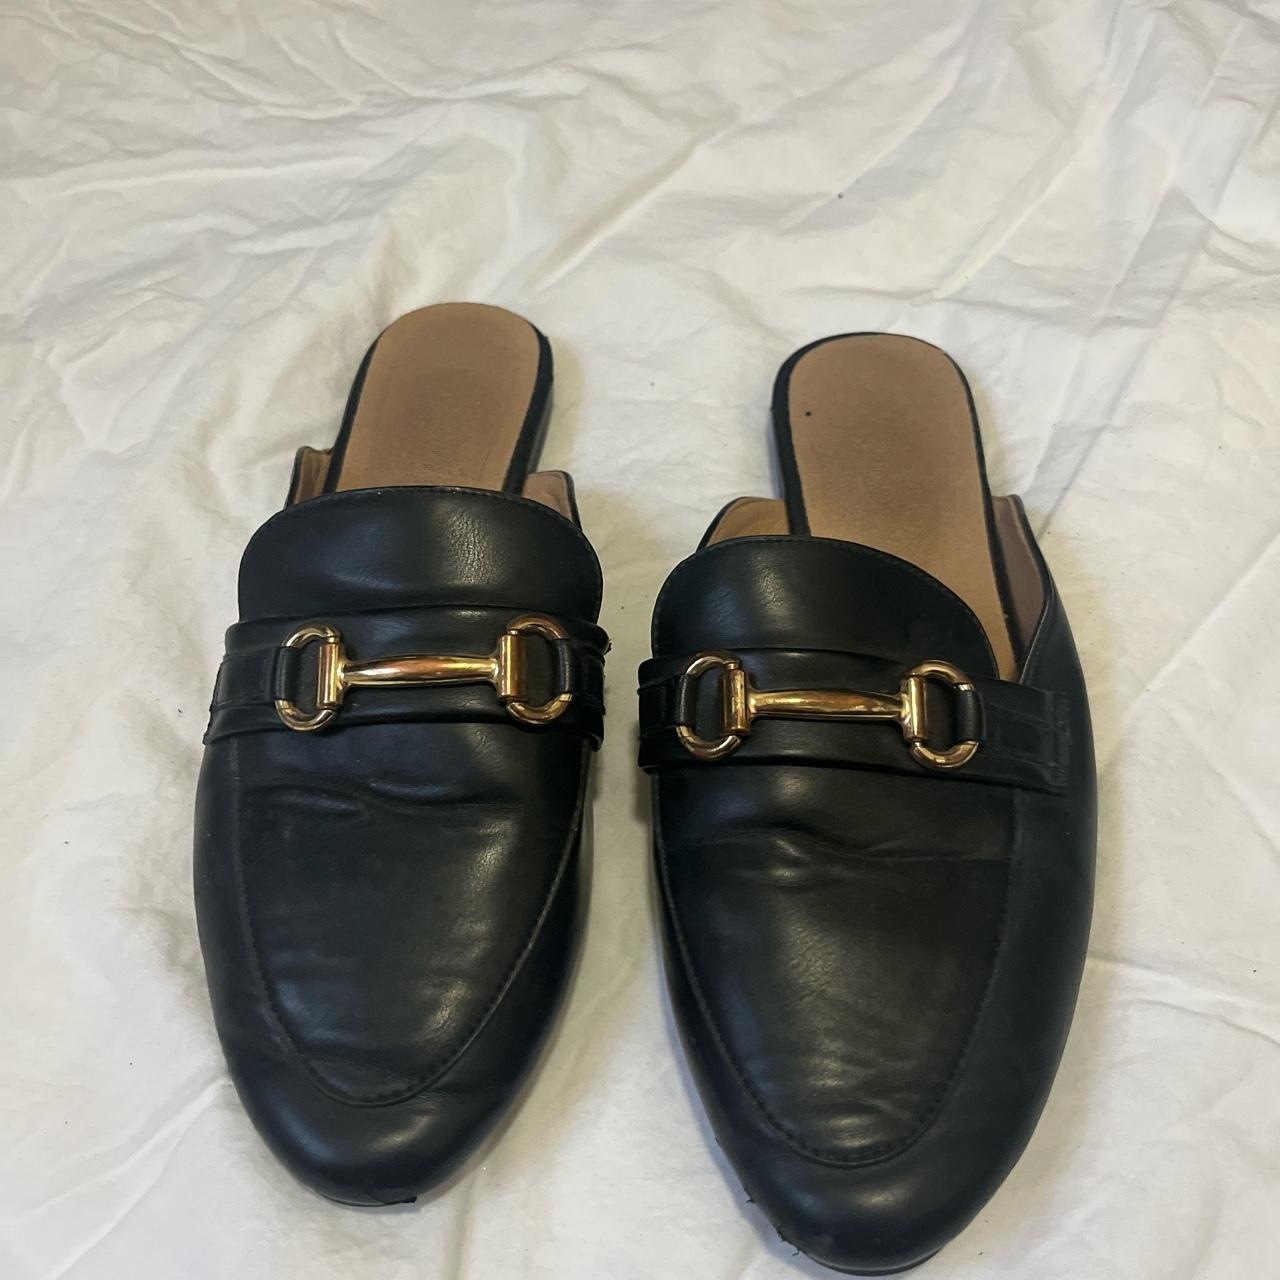 Women's Black and Gold Loafers | Depop